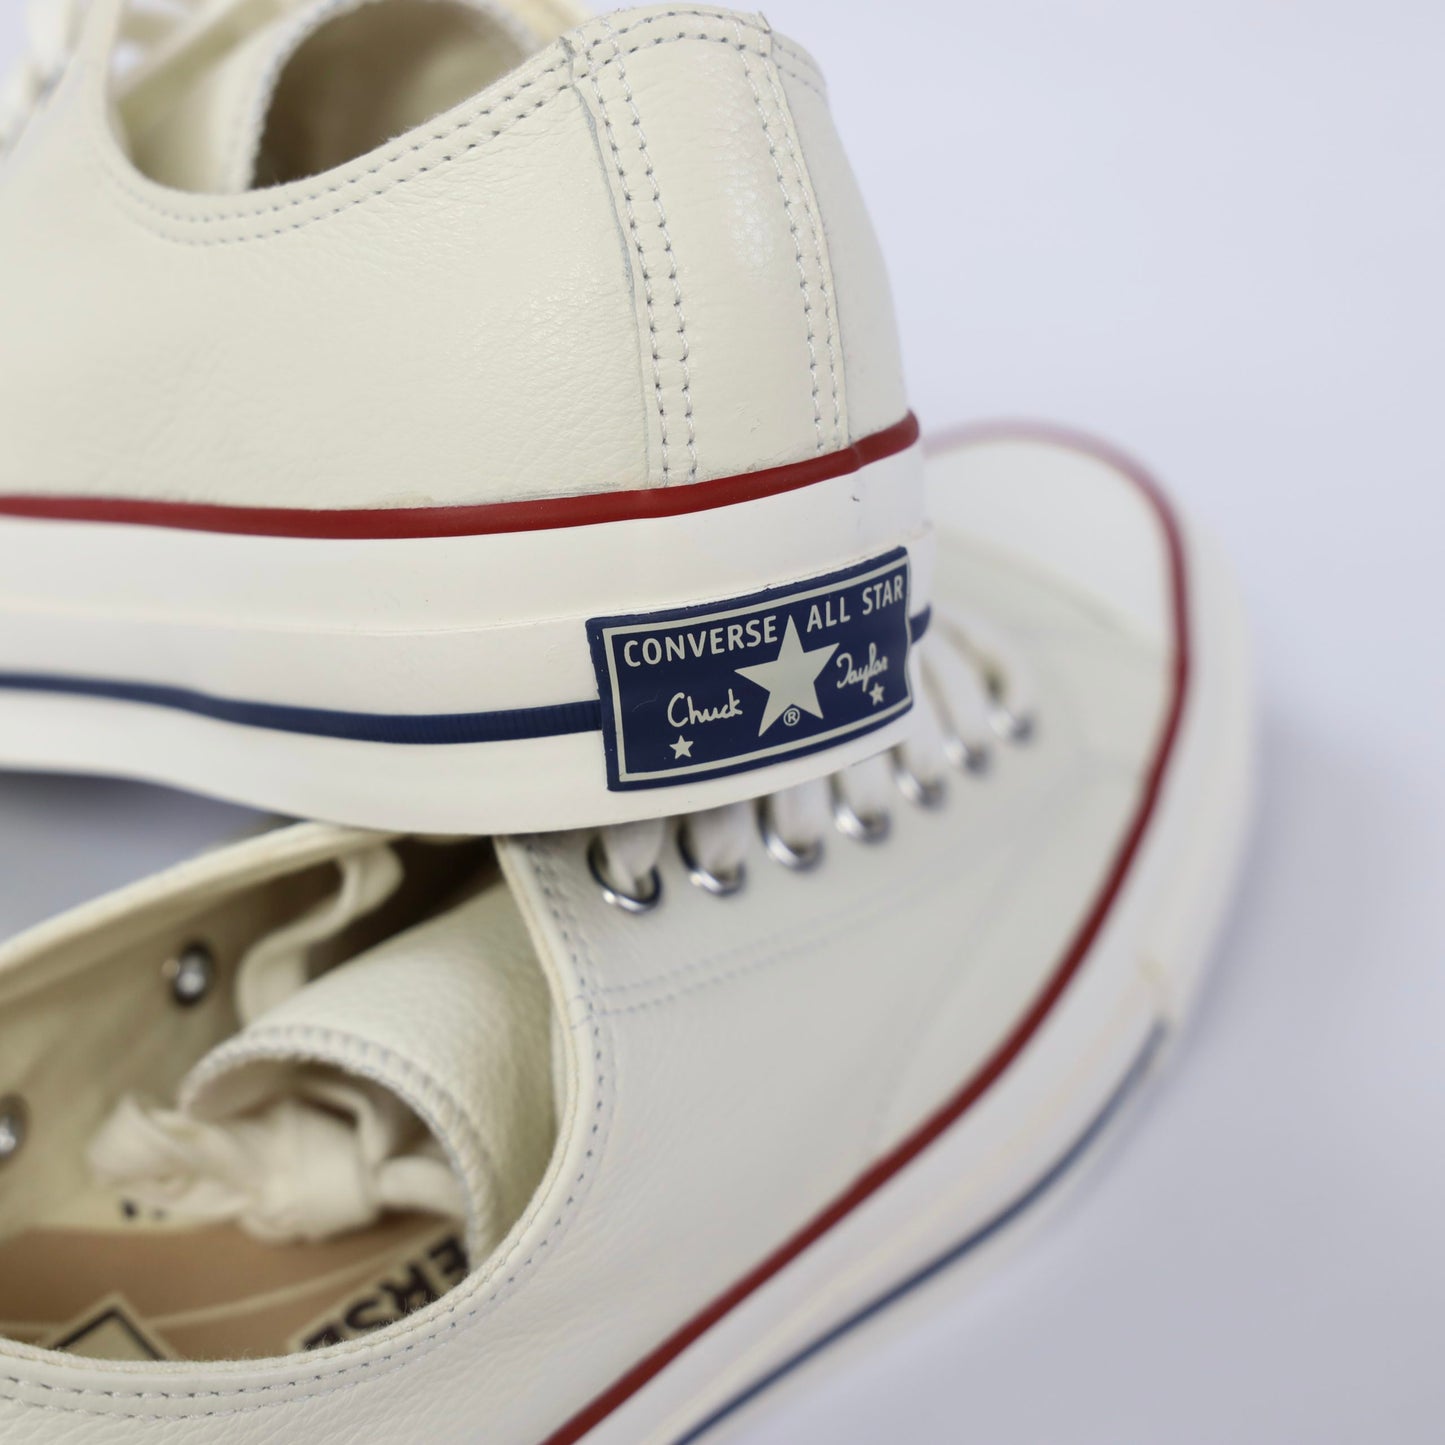 CHUCK TAYLOR LEATHER OX WHITE